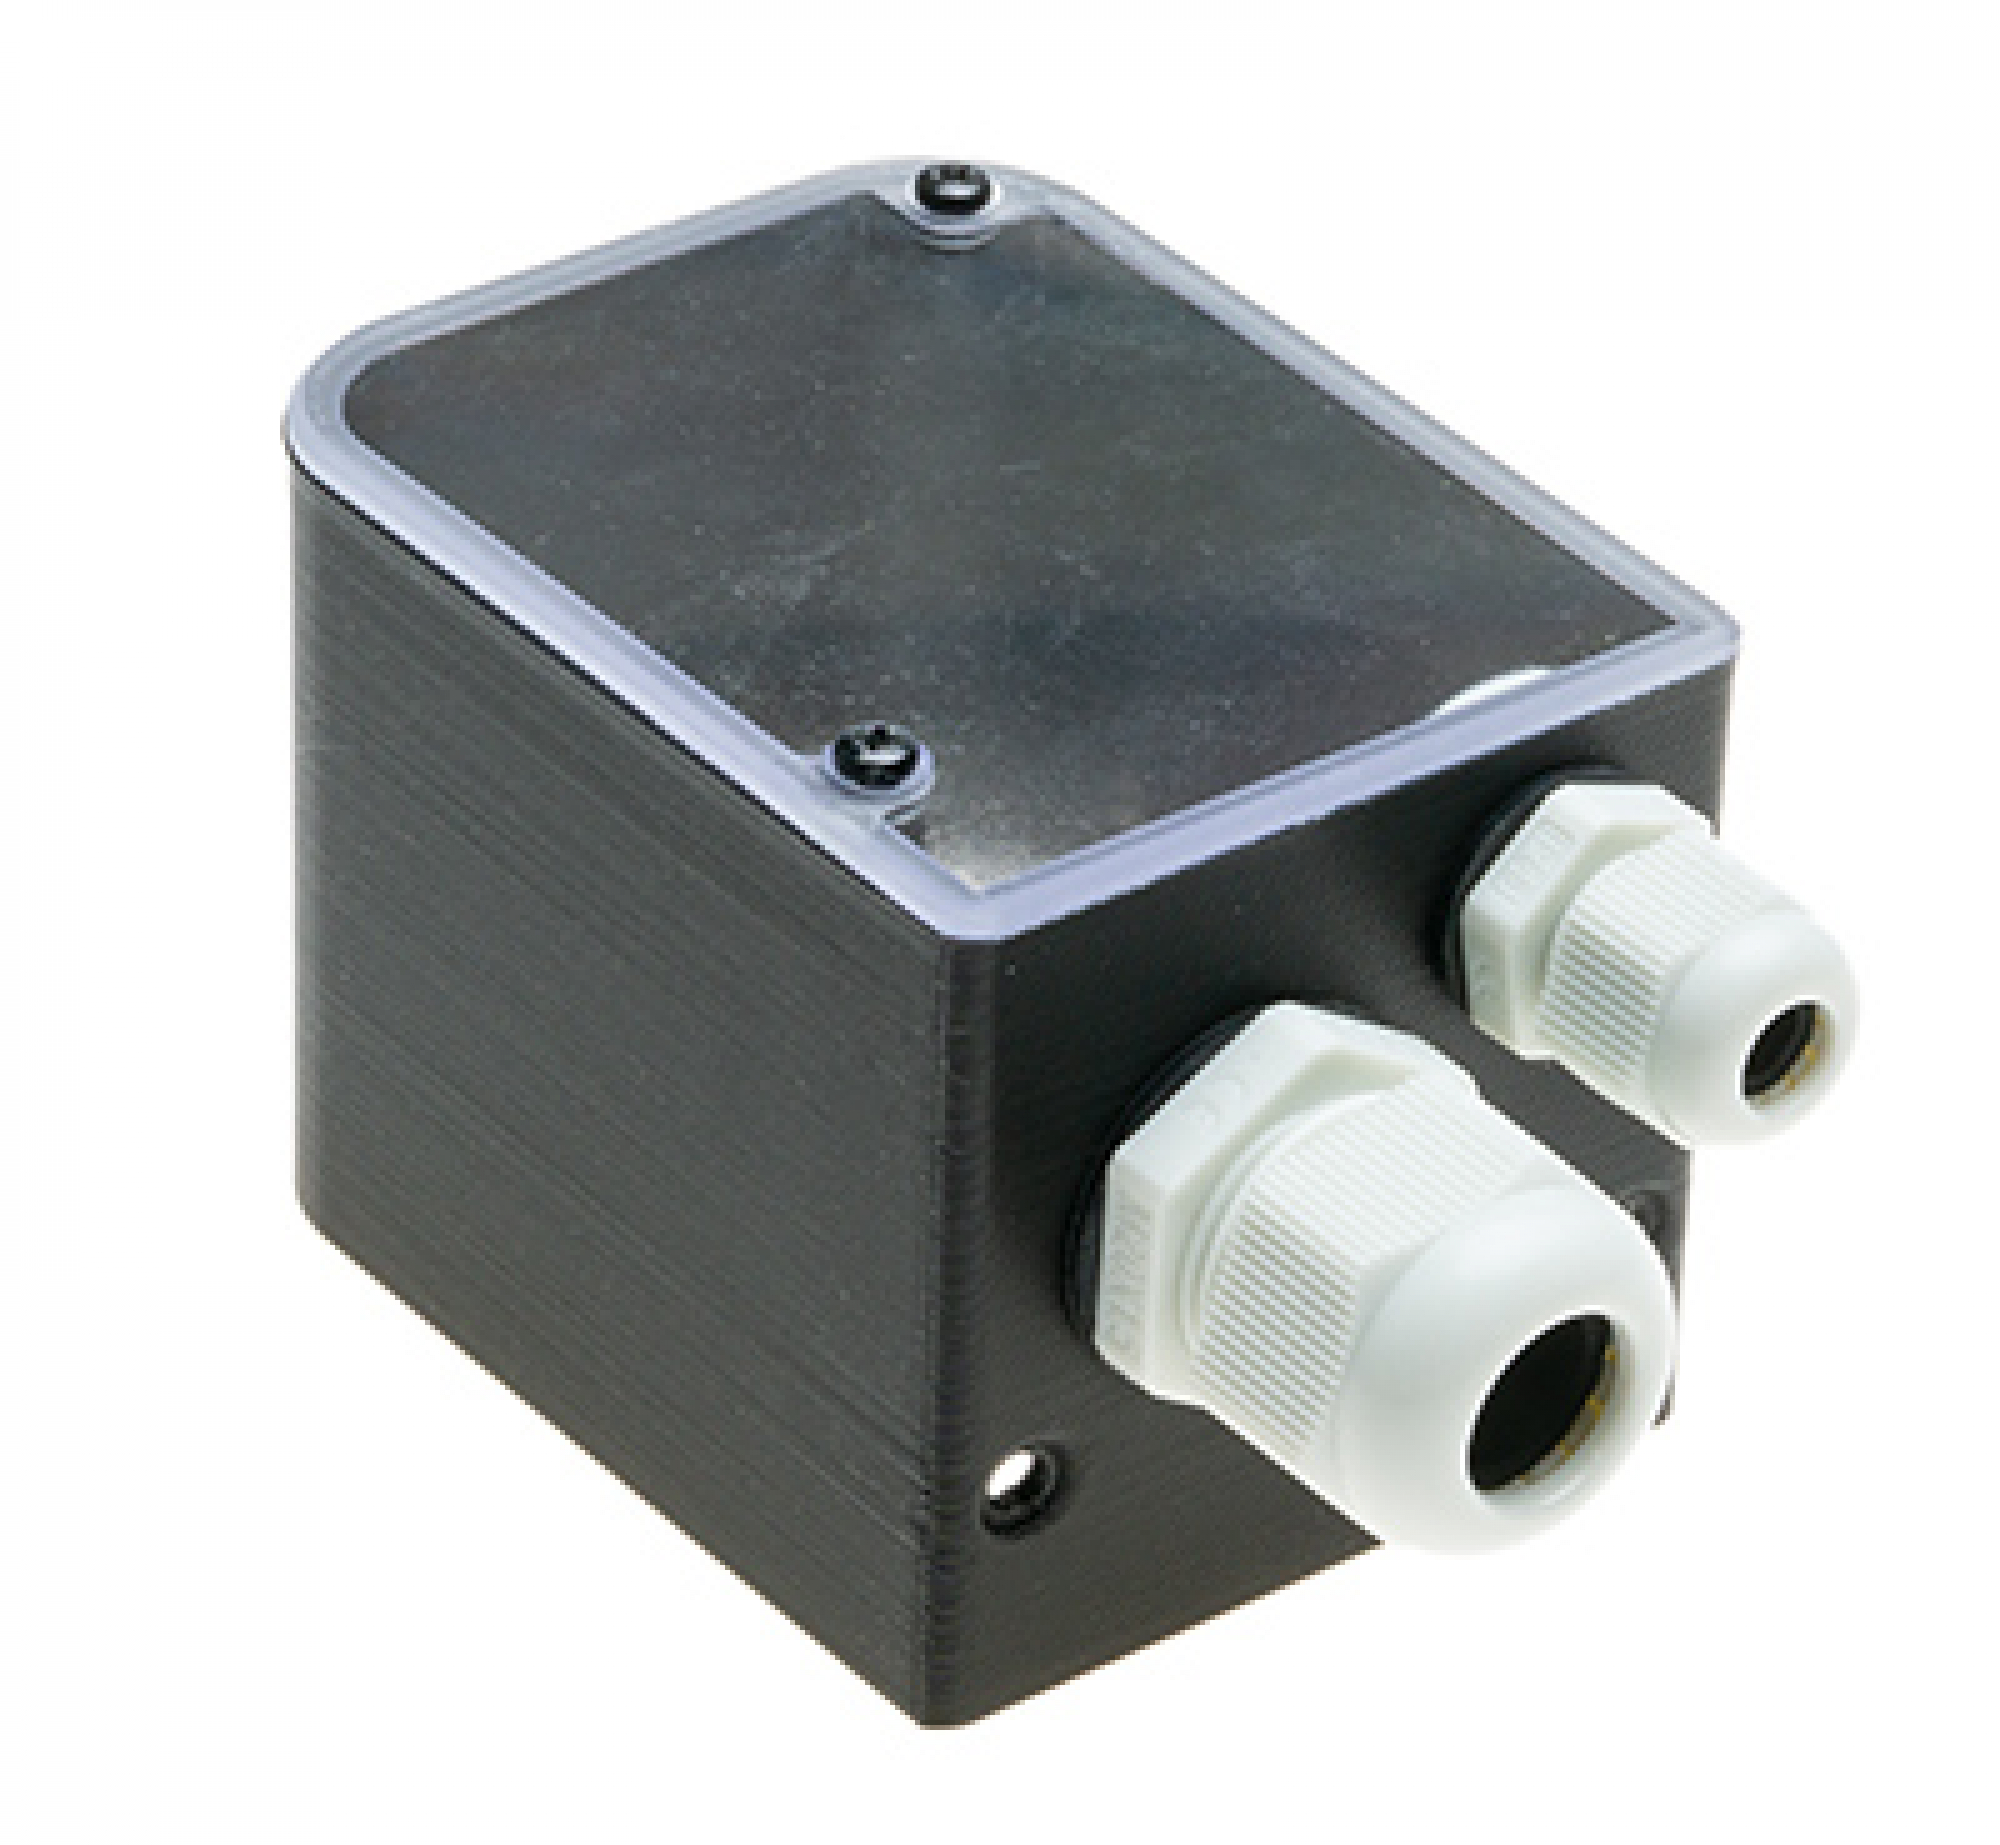 Cover for JMC CL stepmotor 3 Nm and JMC servos 400 W